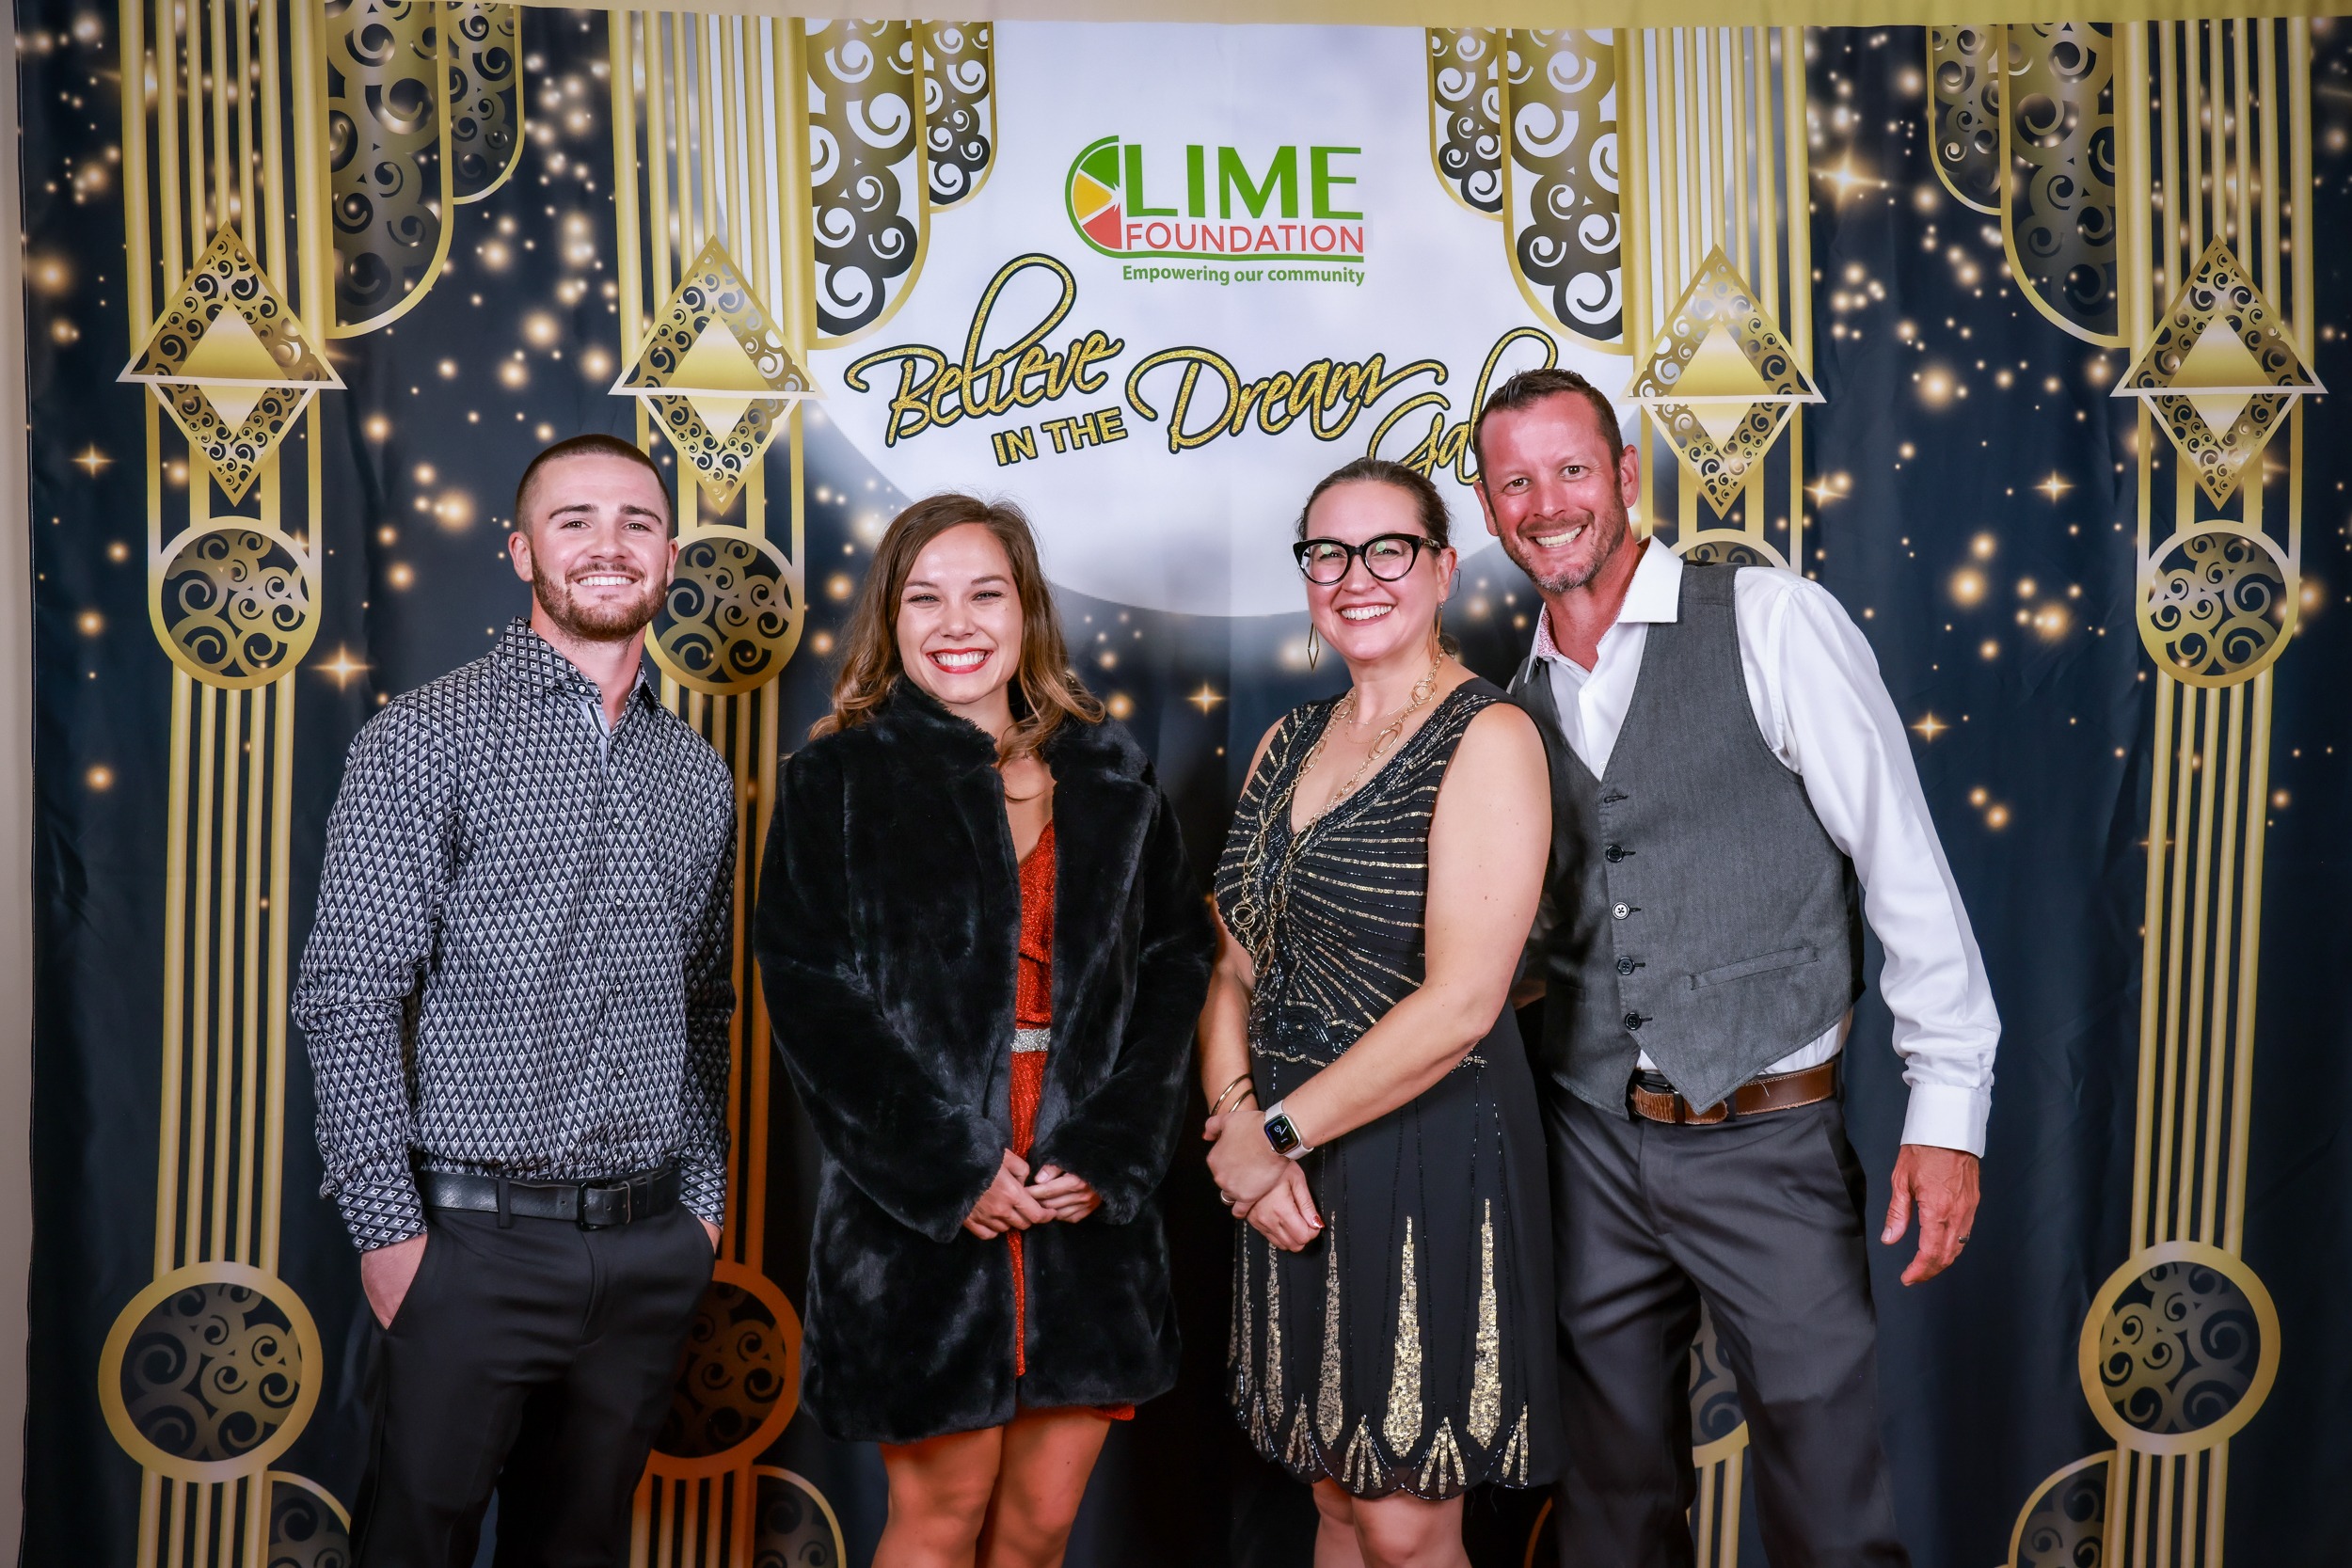 A group of people from The LIME Foundation of Santa Rosa posing for a photo at an event.